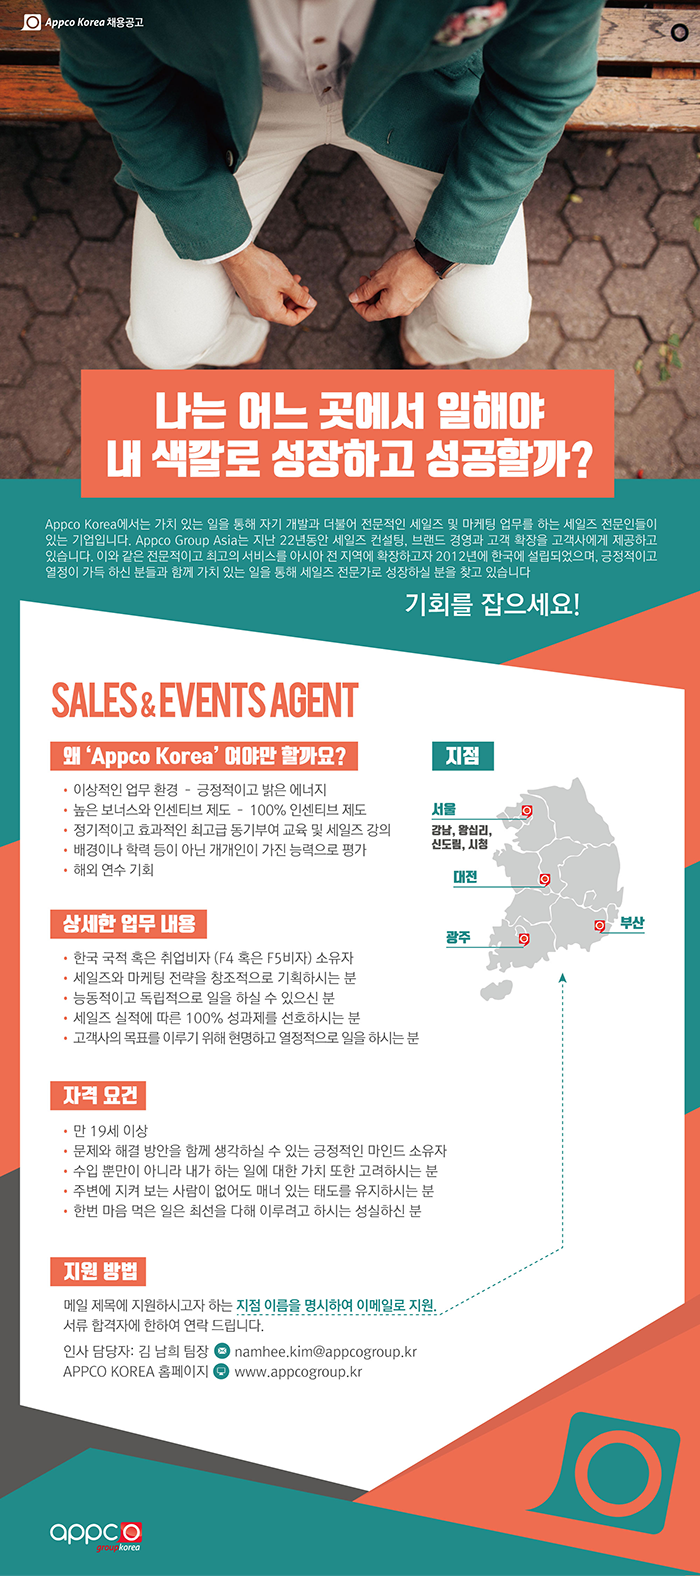 SALES & EVENTS AGENT 채용